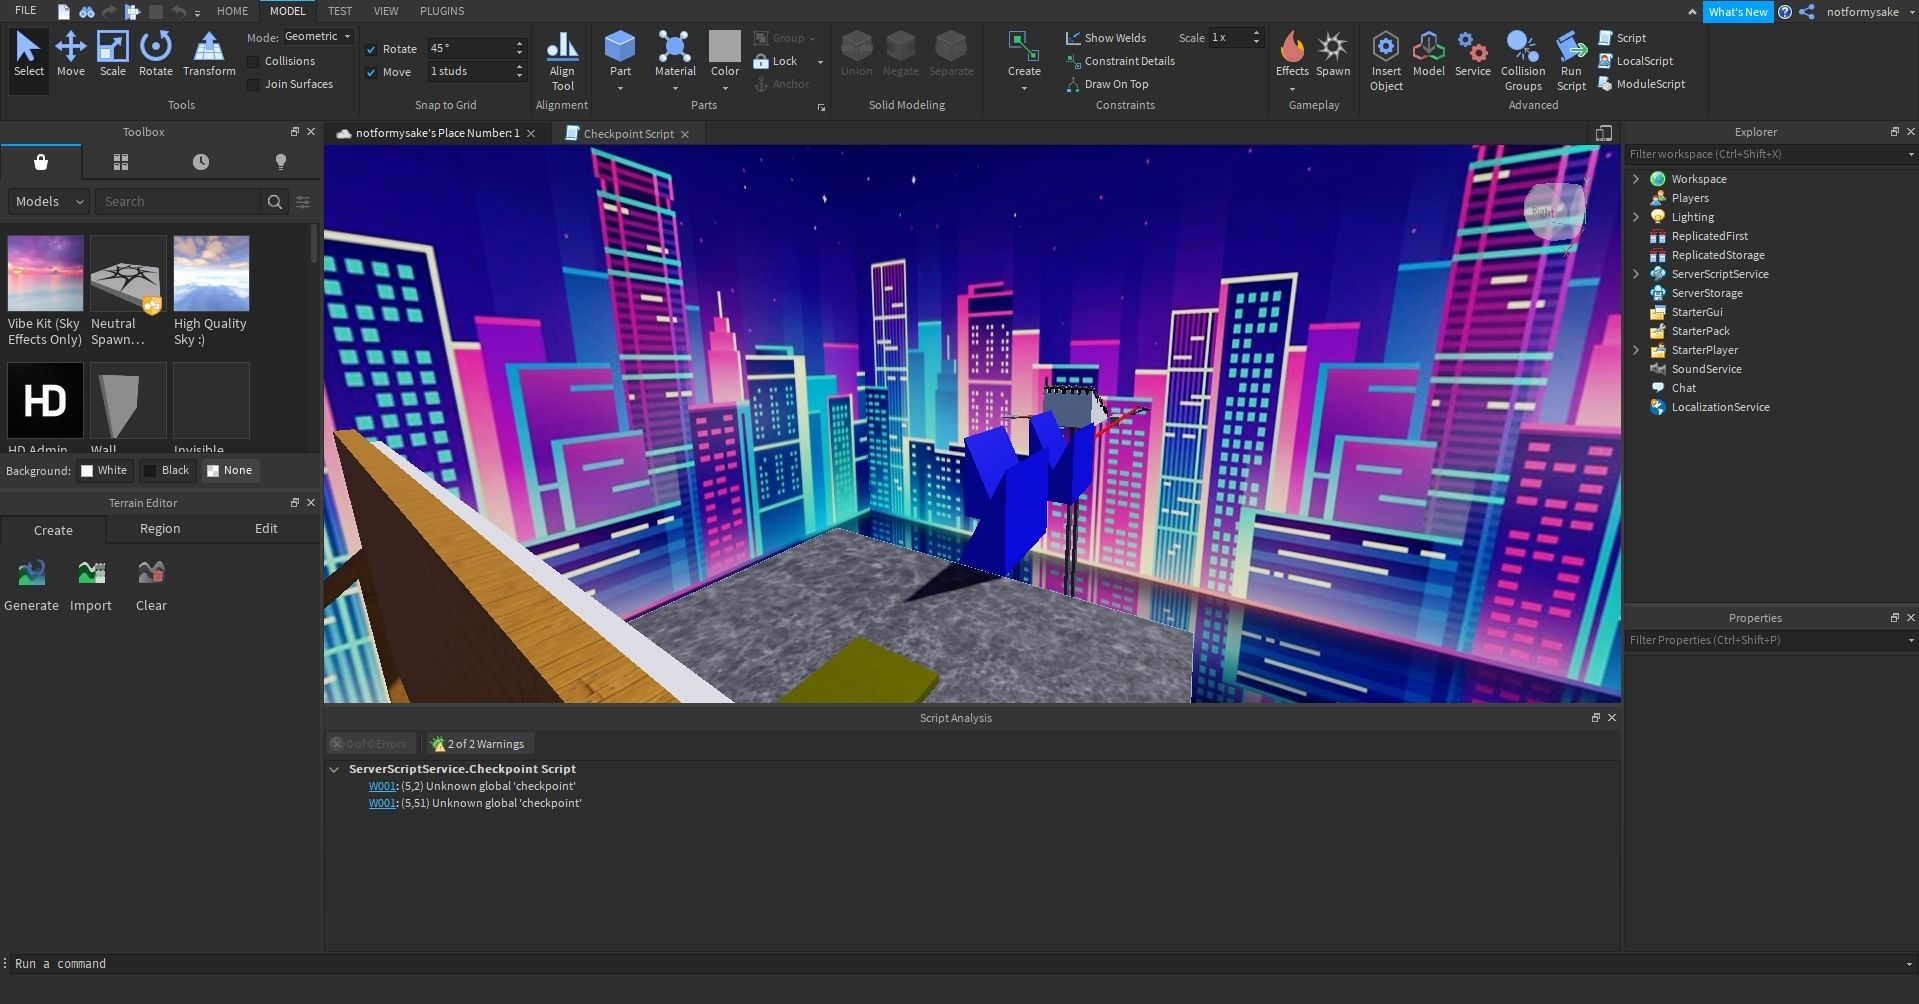 Roblox Studio with game being developed